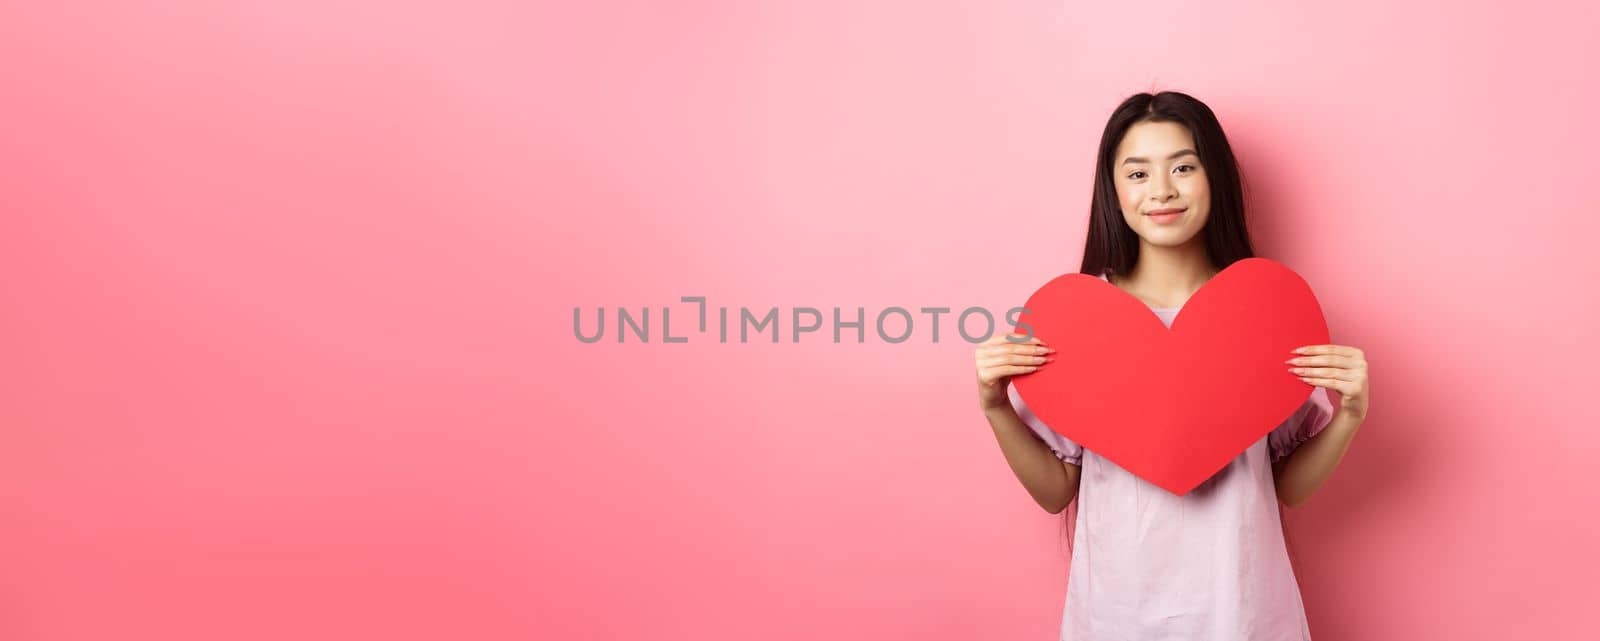 Valentines day concept. Cute teenage asian girl showing big red heart card, falling in love, going on romantic date in dress, smiling tender at camera, pink background.